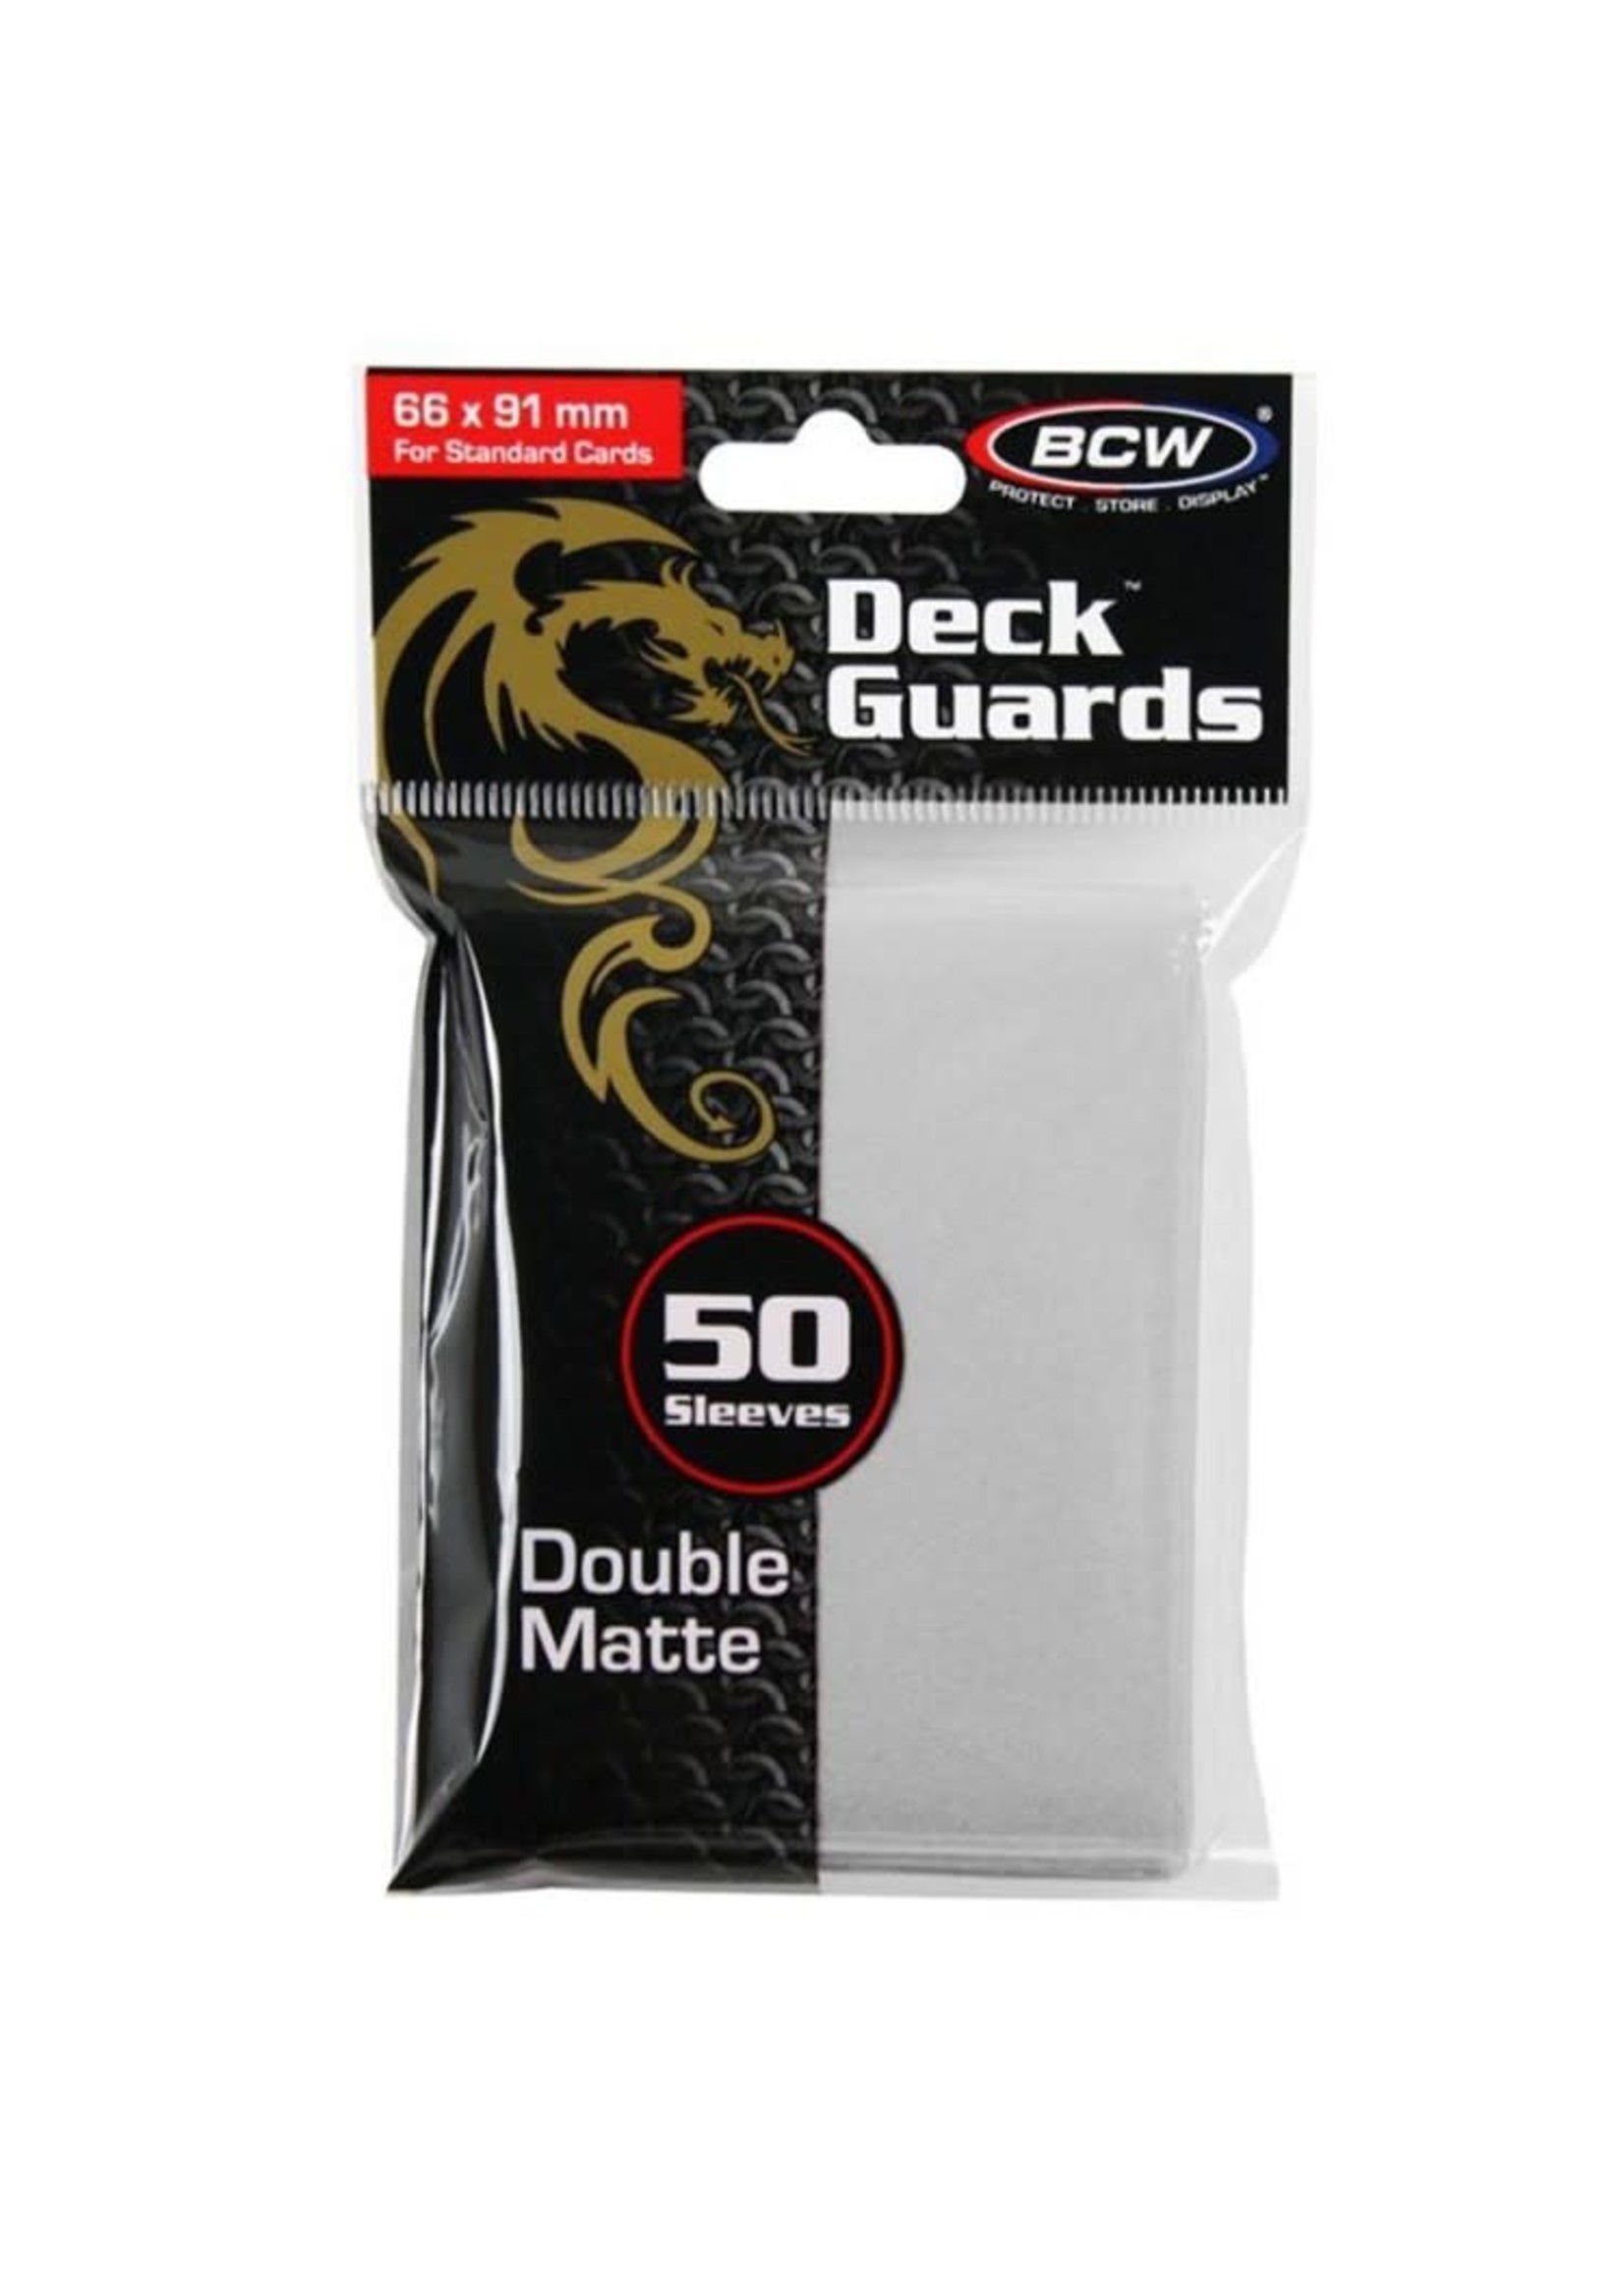 BCW BCW 50 CARD DECK GUARD SLEEVES WHITE